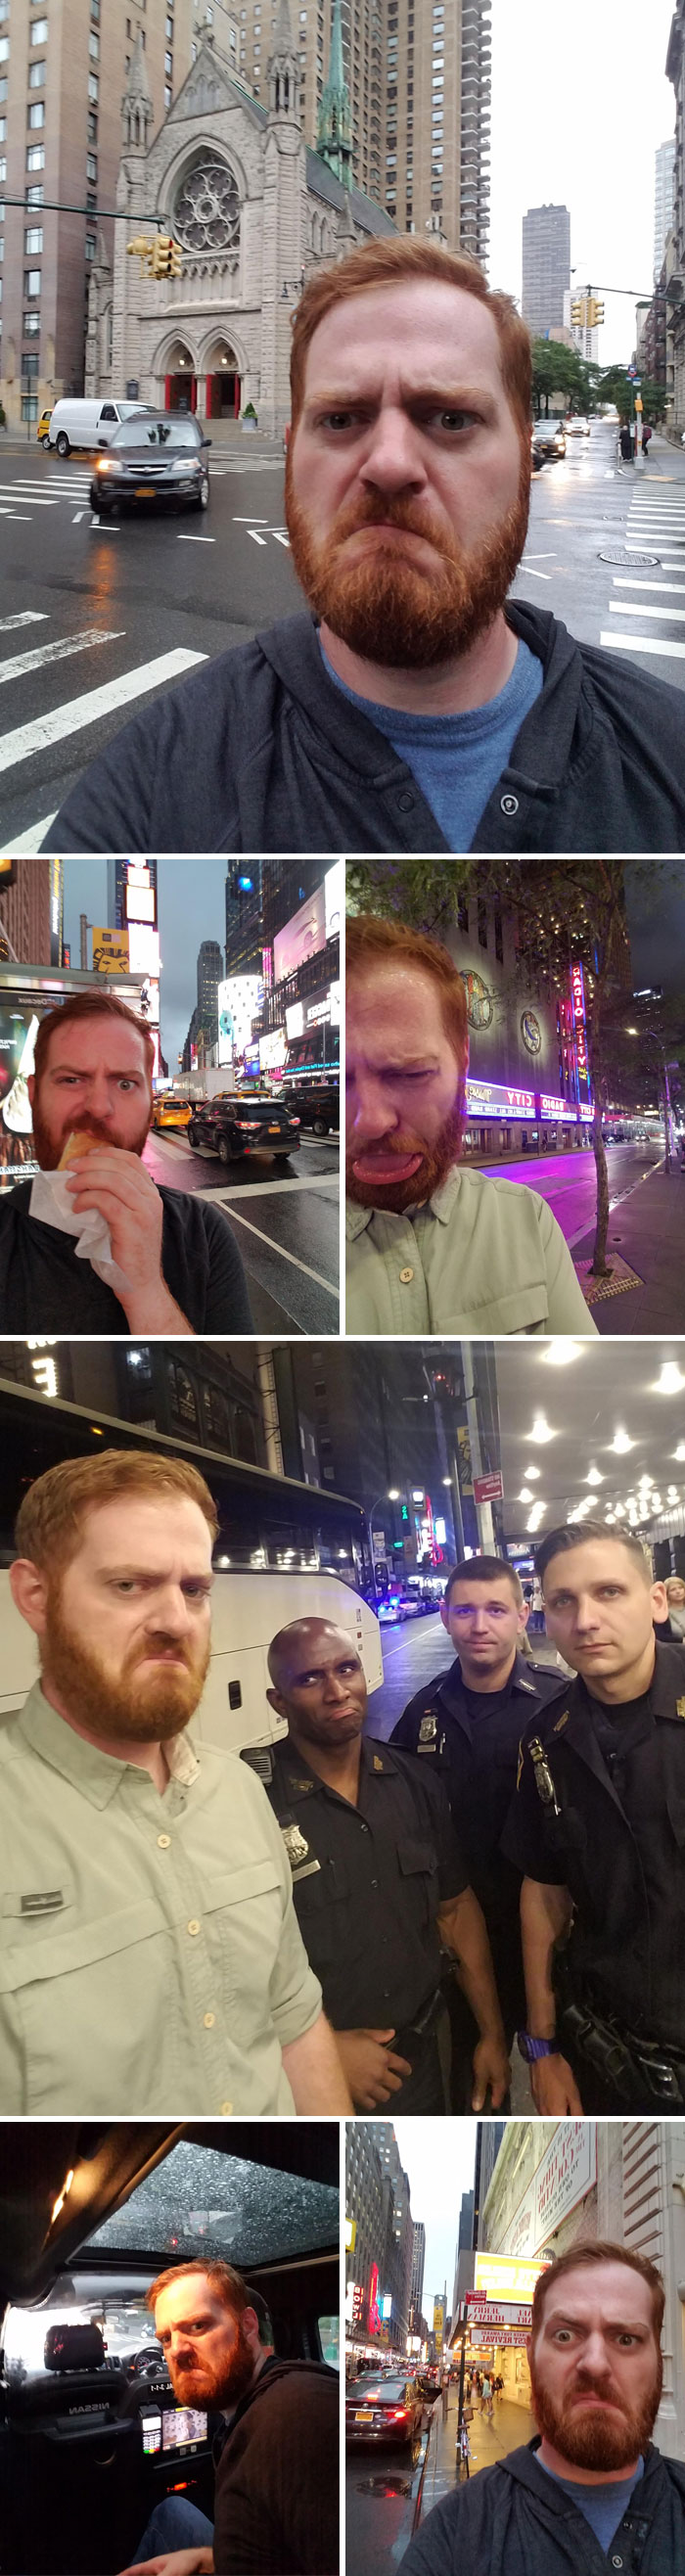 Went To NYC On Business And I Had To Show My Wife I Wasn't Enjoying It Without Her, So Here Is Me Having A Bad Time All Over New York